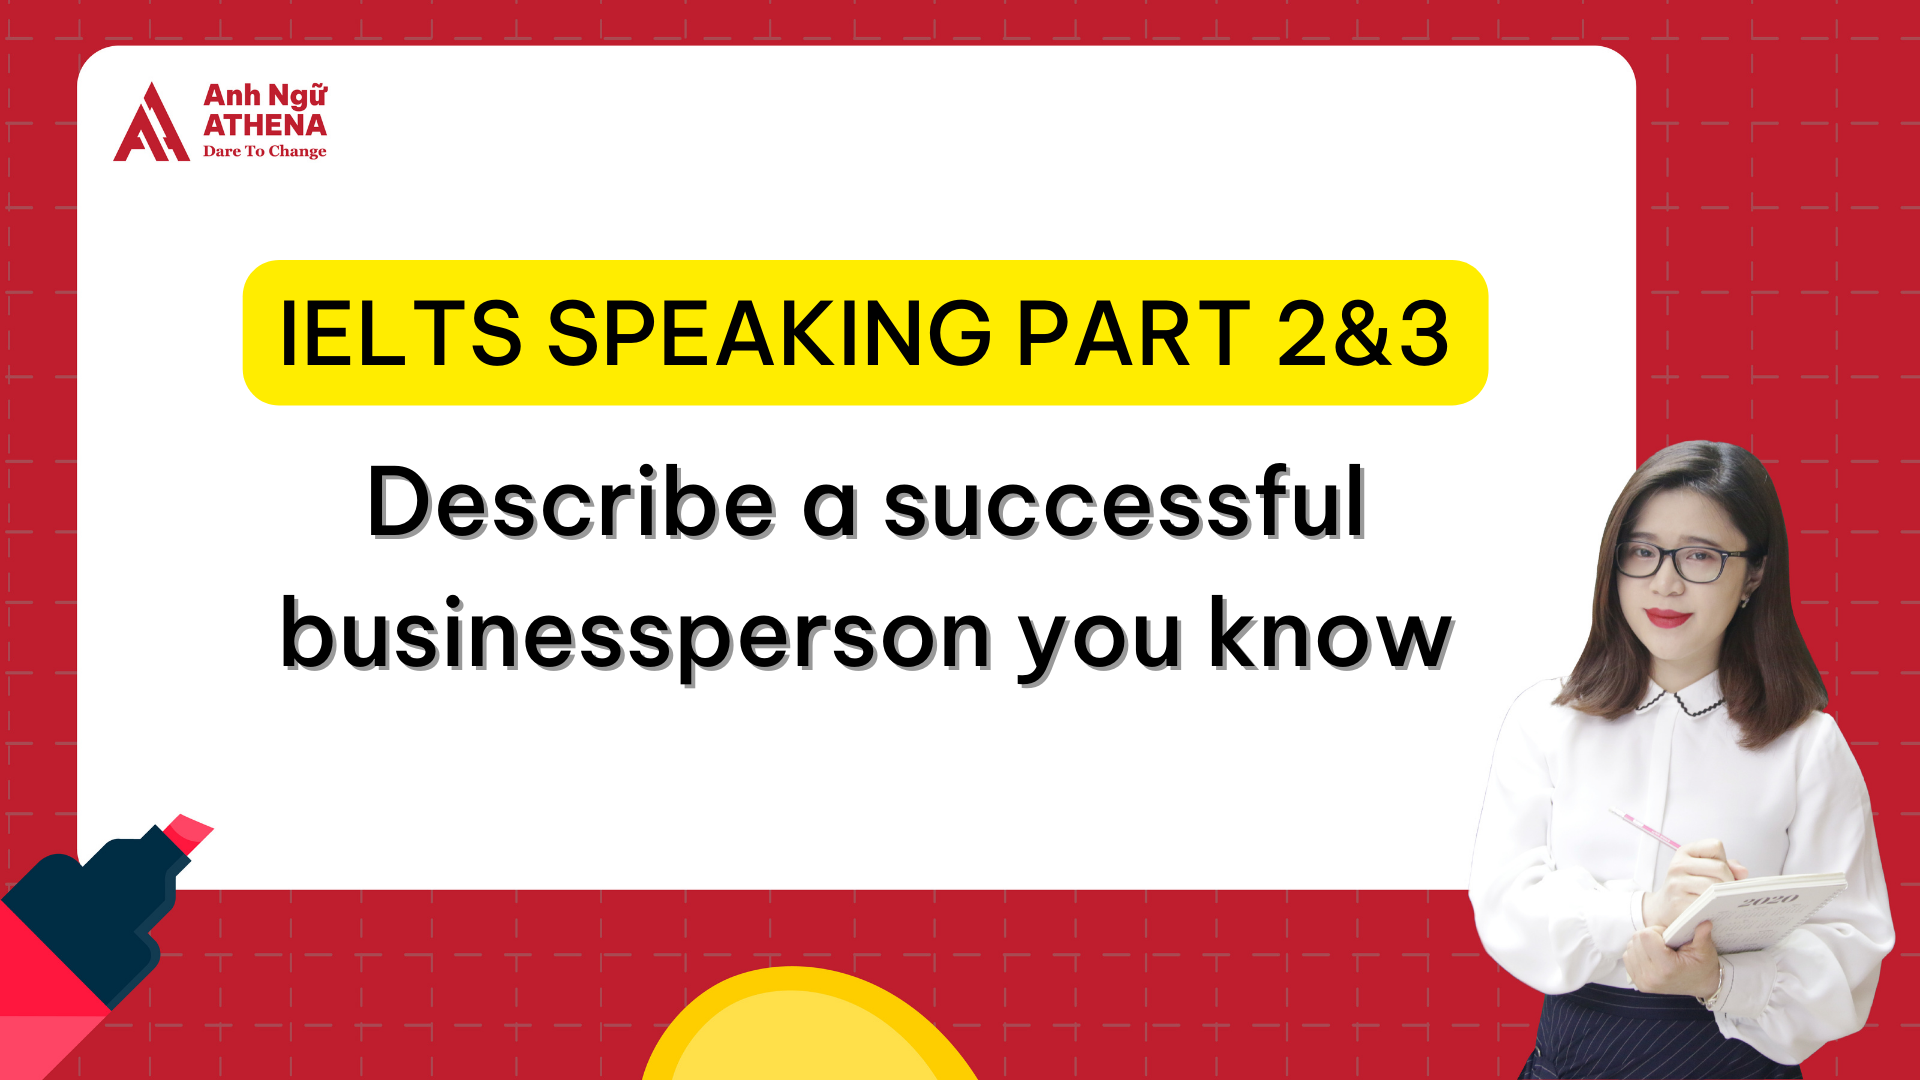 Bài mẫu IELTS Speaking Part 2 & 3 - Topic: Describe a successful businessperson you know (e.g. running a family business)